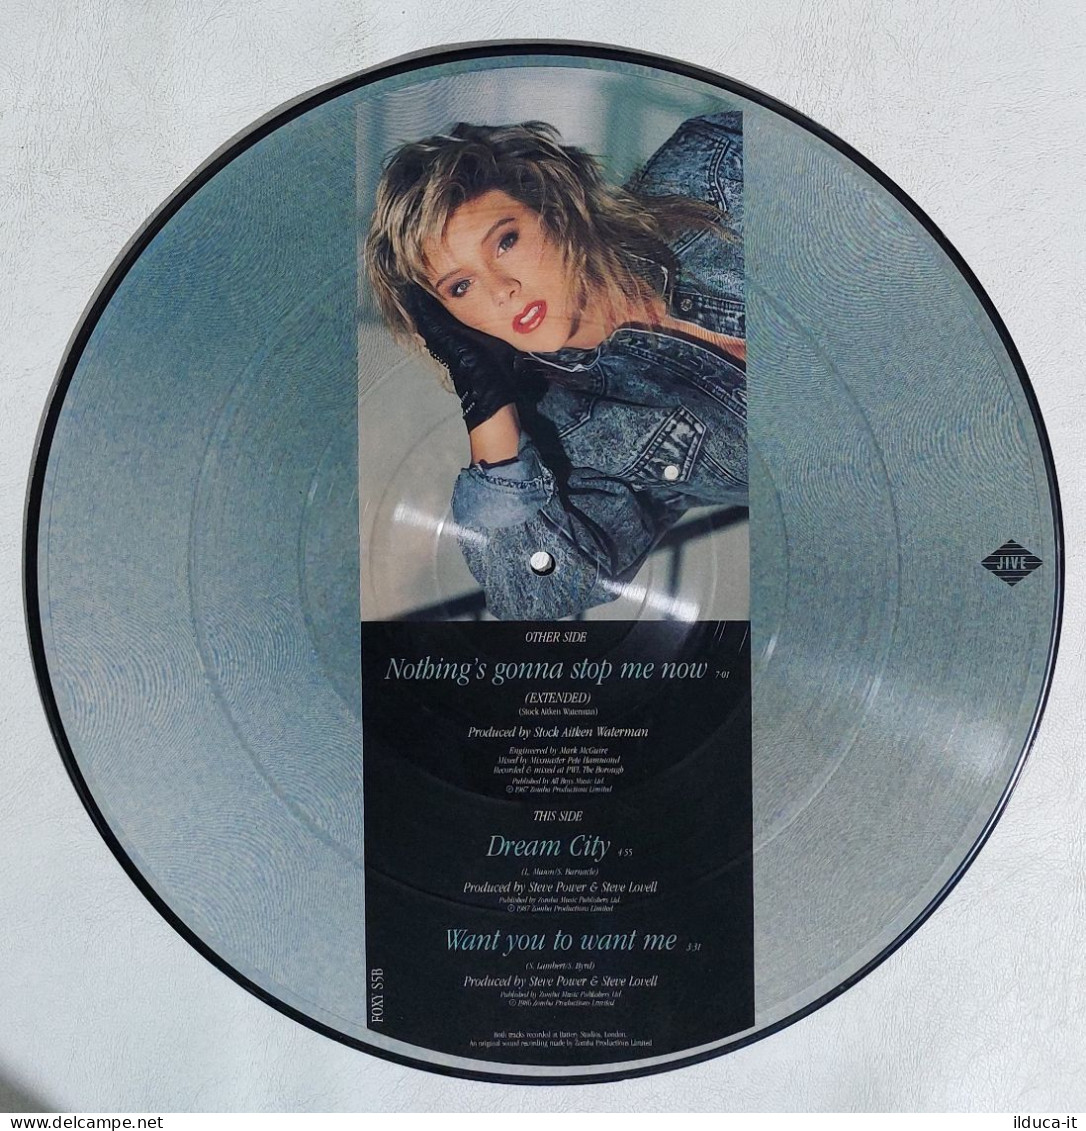 I114383 LP 33 Giri Picture Disc - Samantha Fox - Nothing's Gonna Stop Me Now - Limited Editions